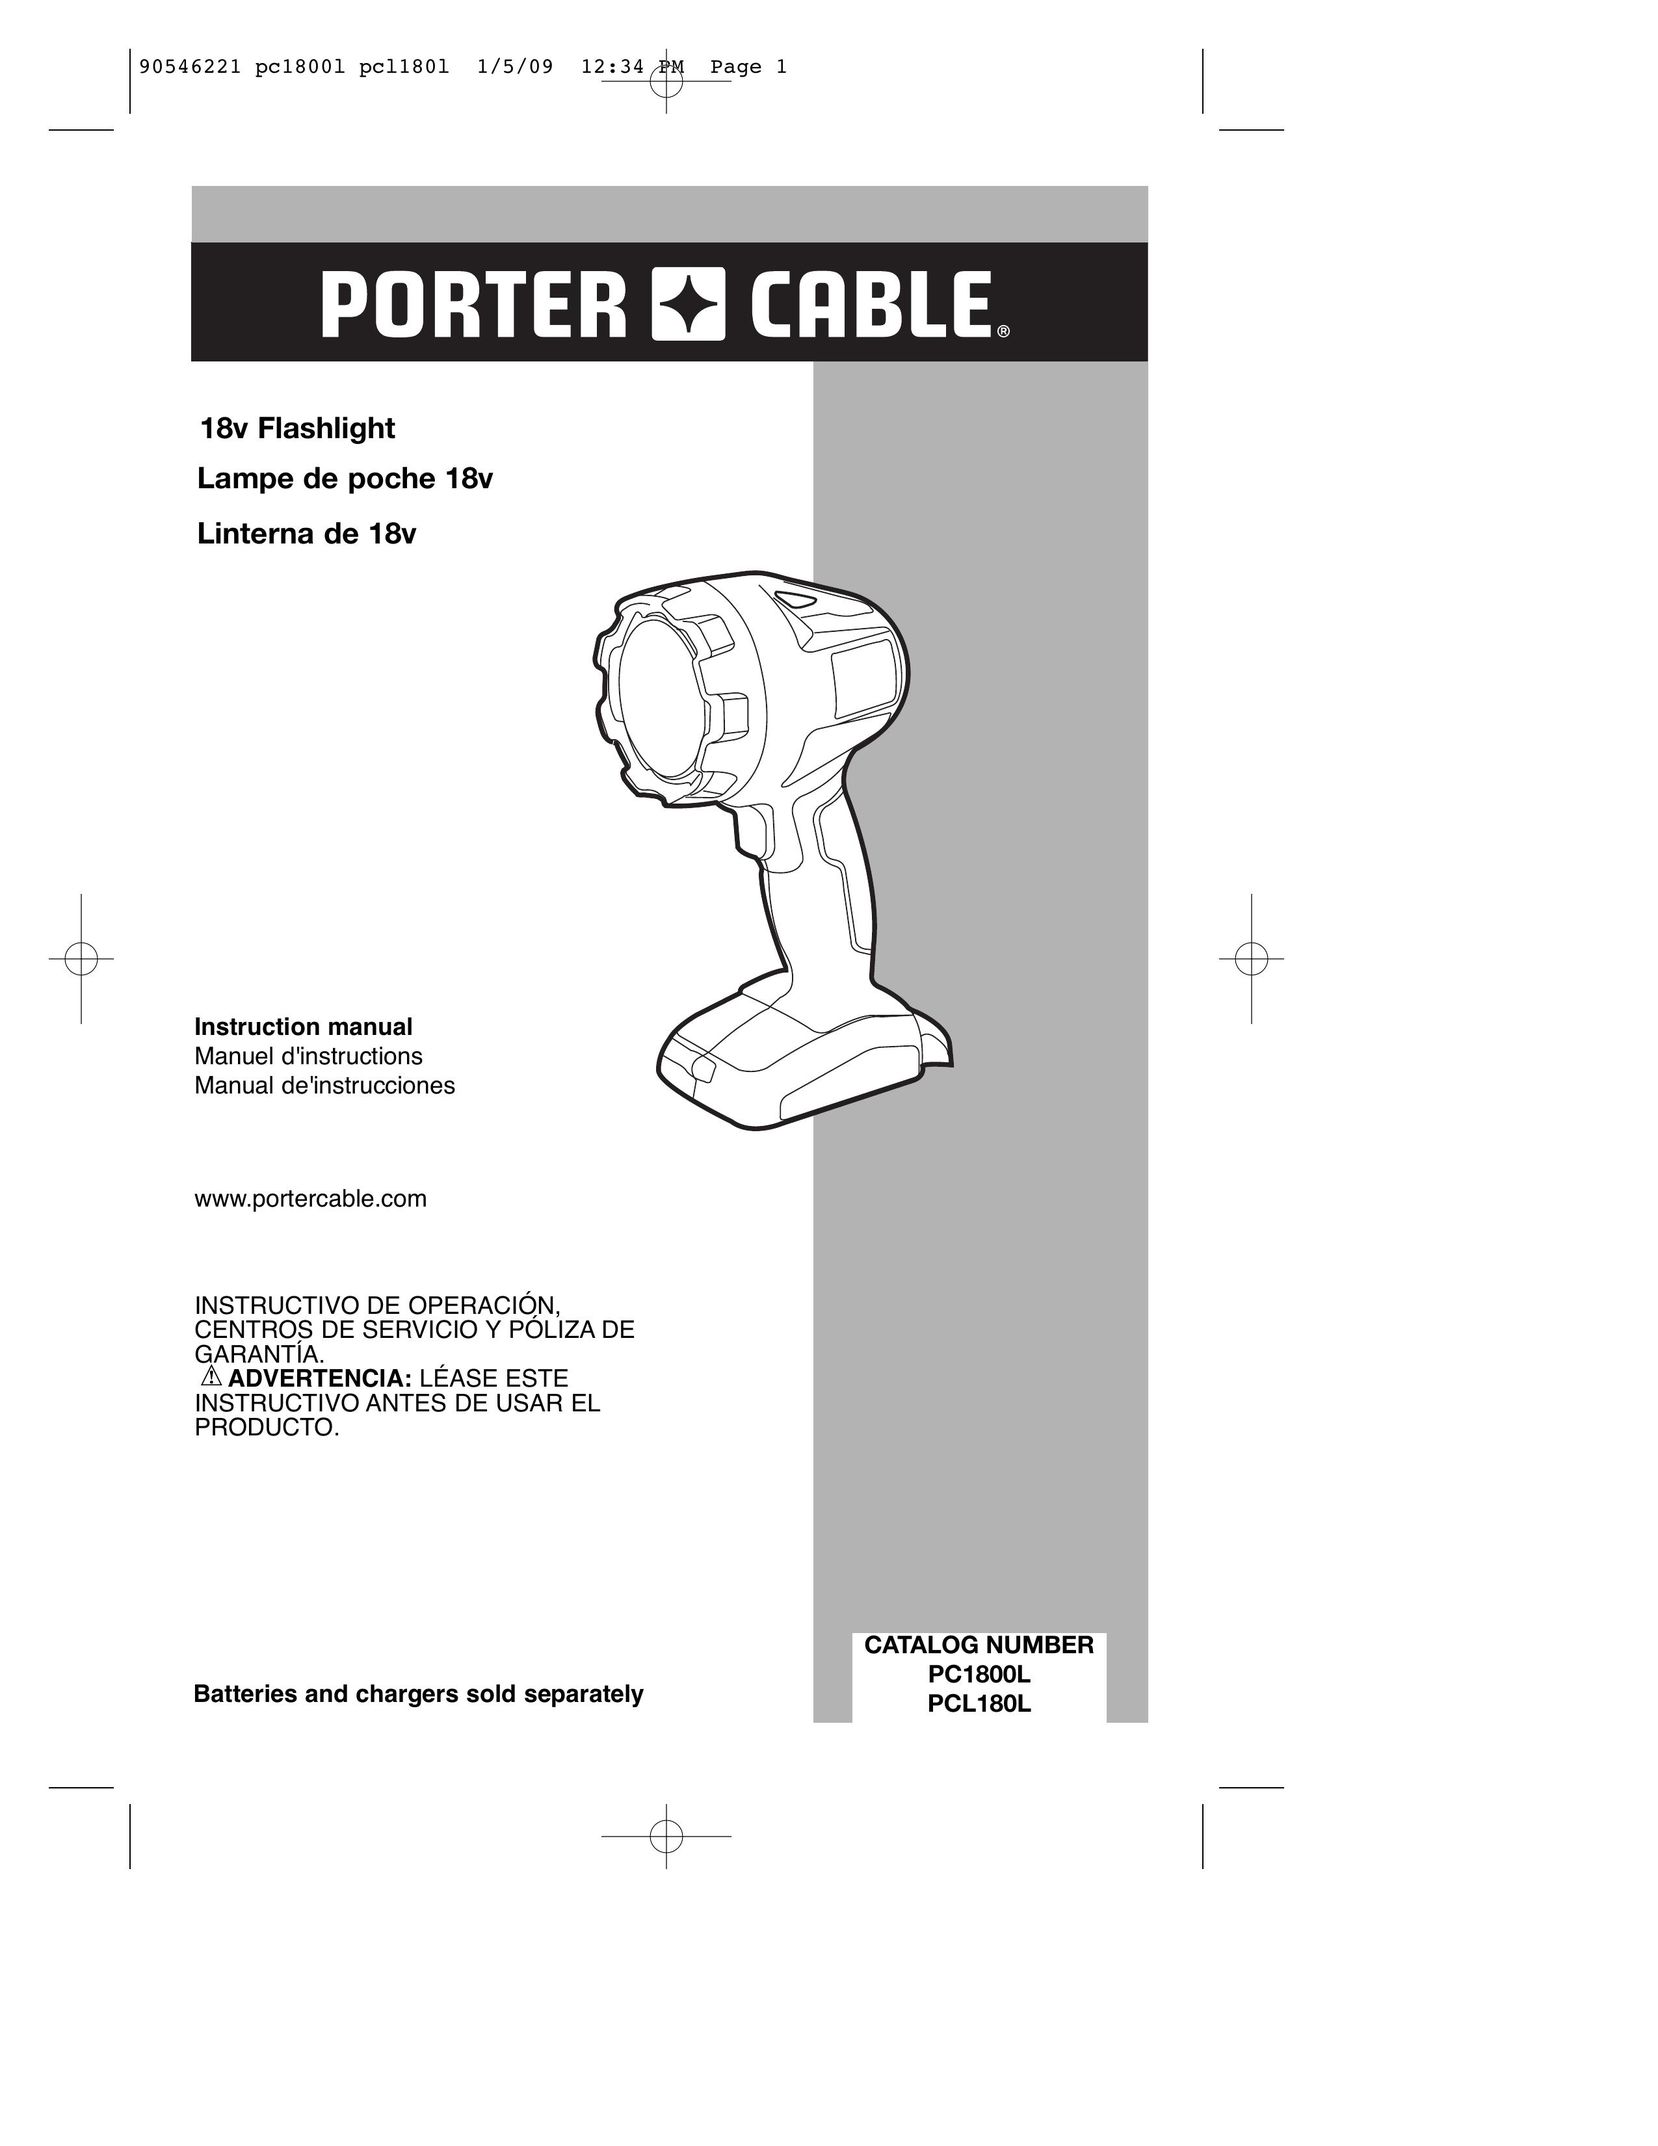 Porter-Cable 90546221 Home Safety Product User Manual